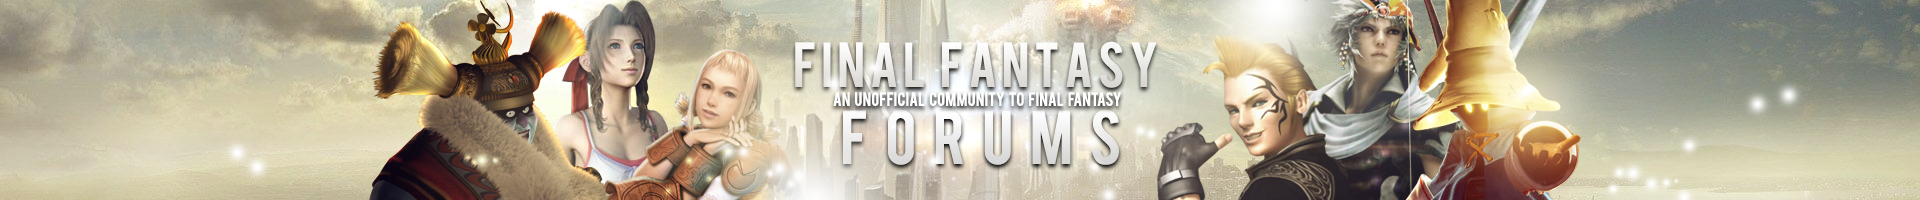 final_fantasy_forums_banner__2015__by_seventosix-d9tfvdi.png